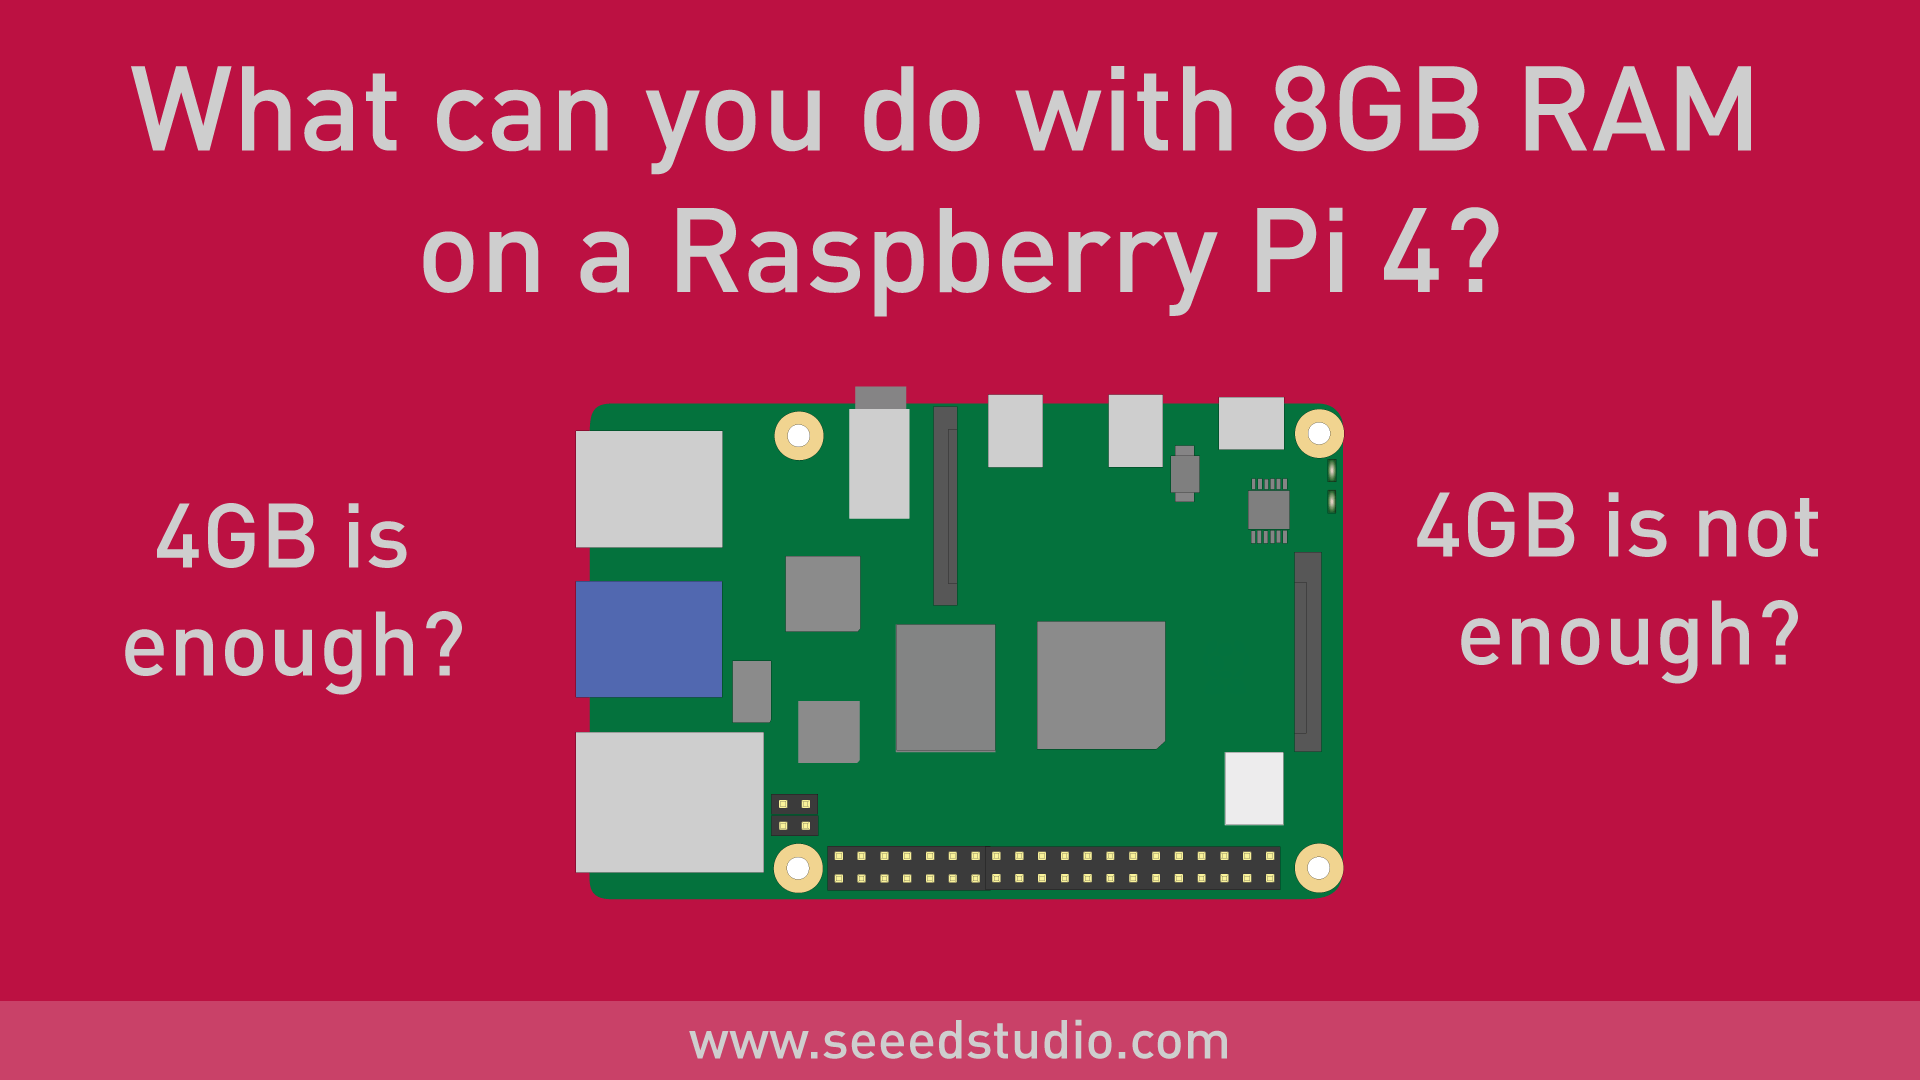 What can you do with 8GB RAM on a Raspberry Pi 4? - Latest Open